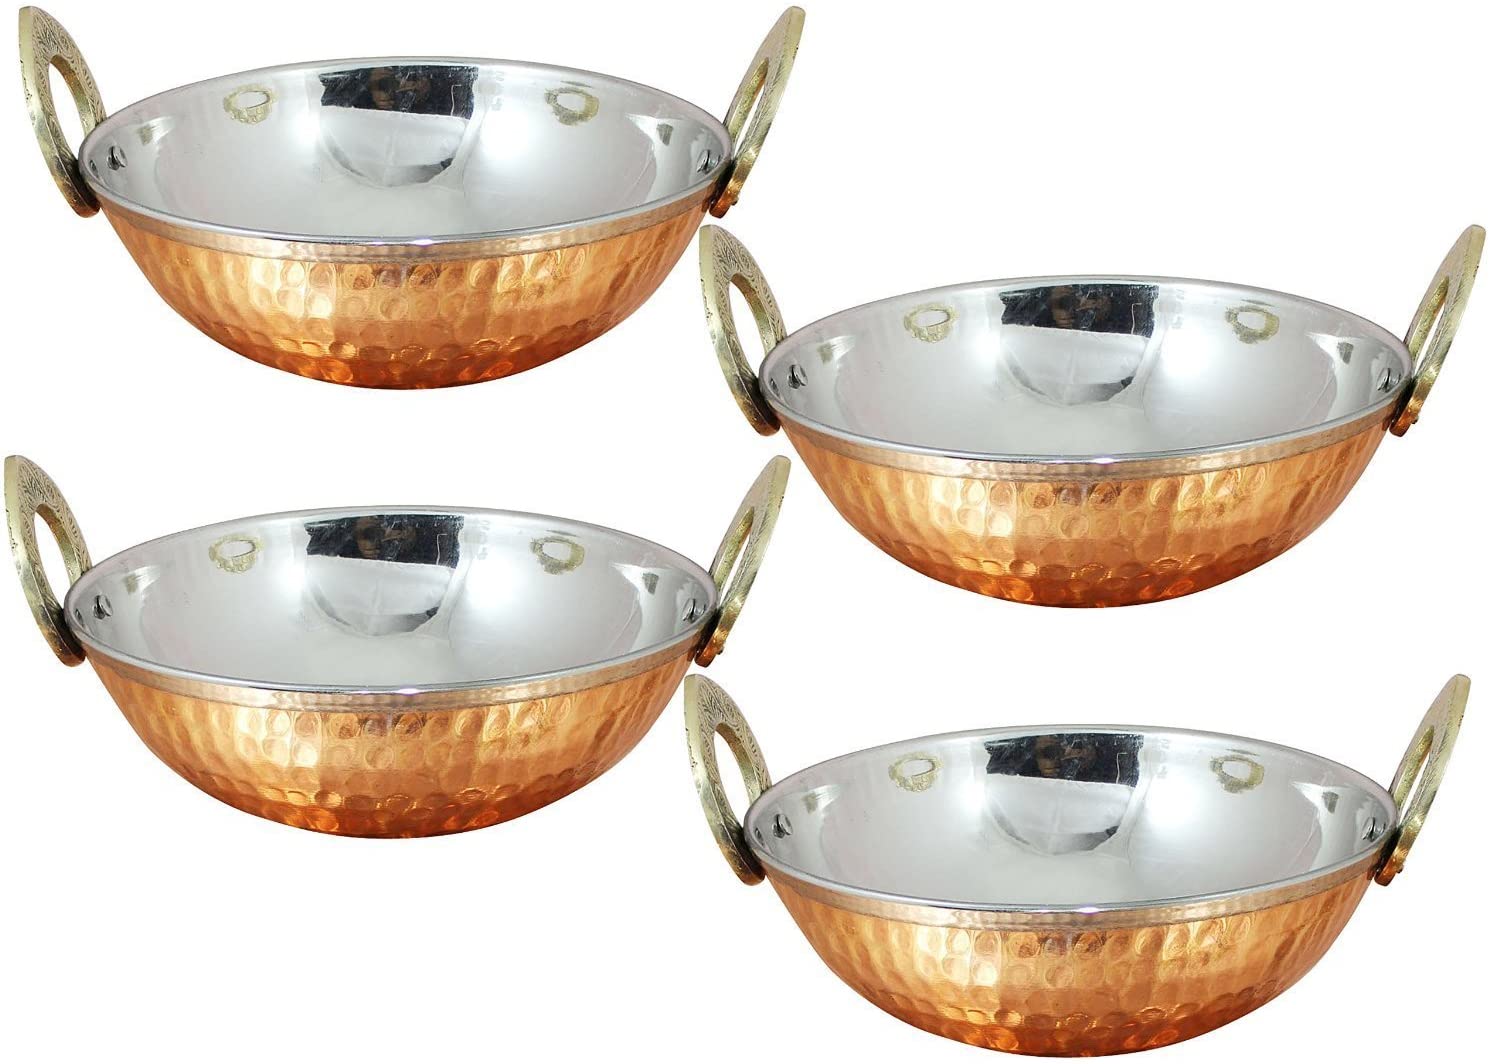 Copper Bowls for Indian Food